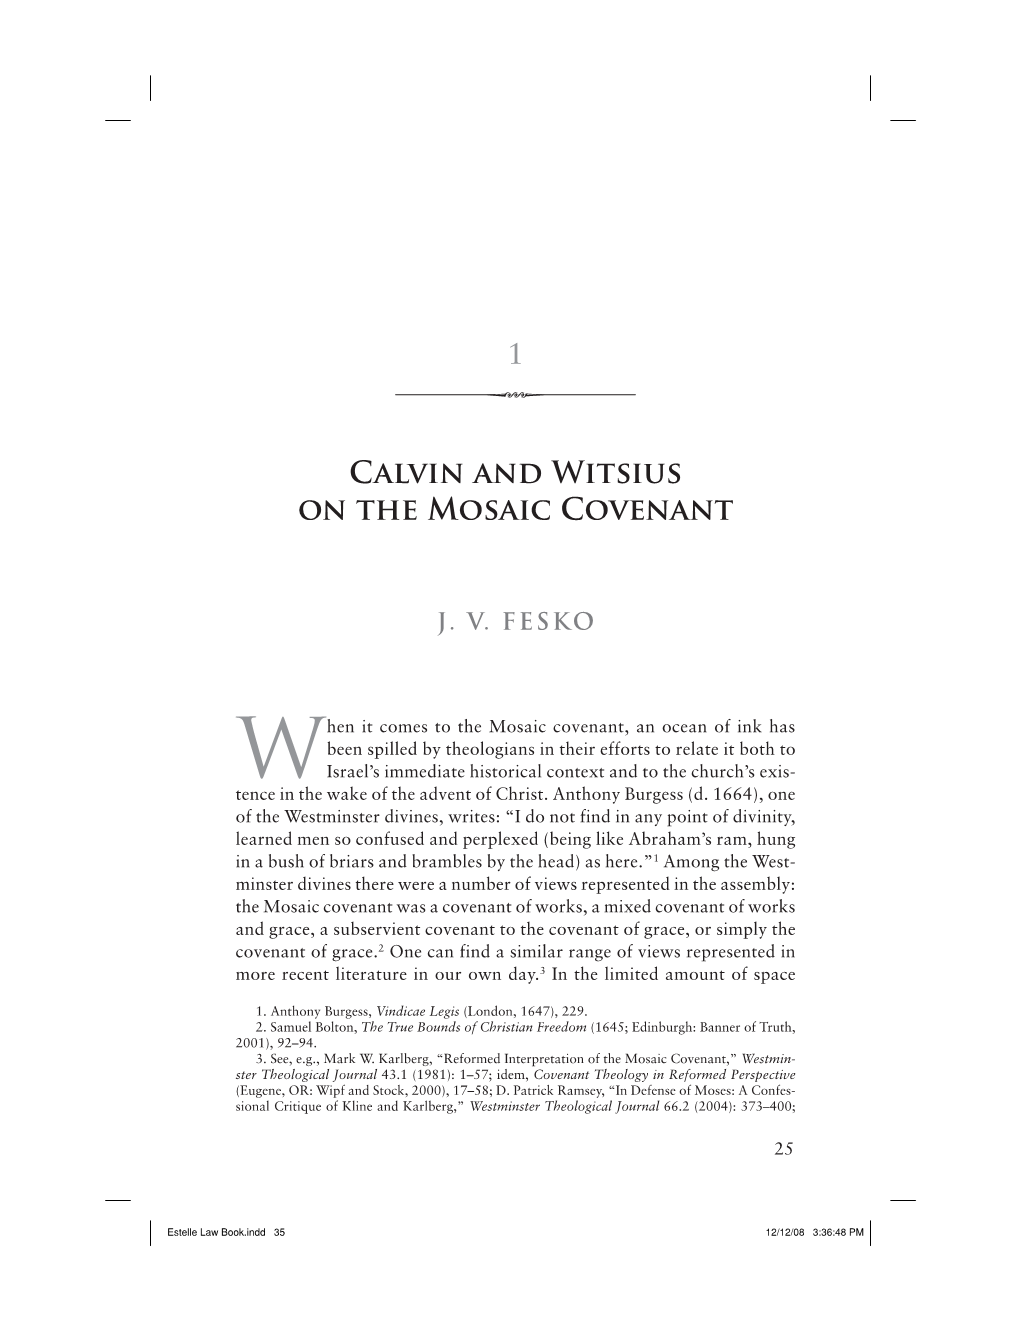 1 Calvin and Witsius on the Mosaic Covenant